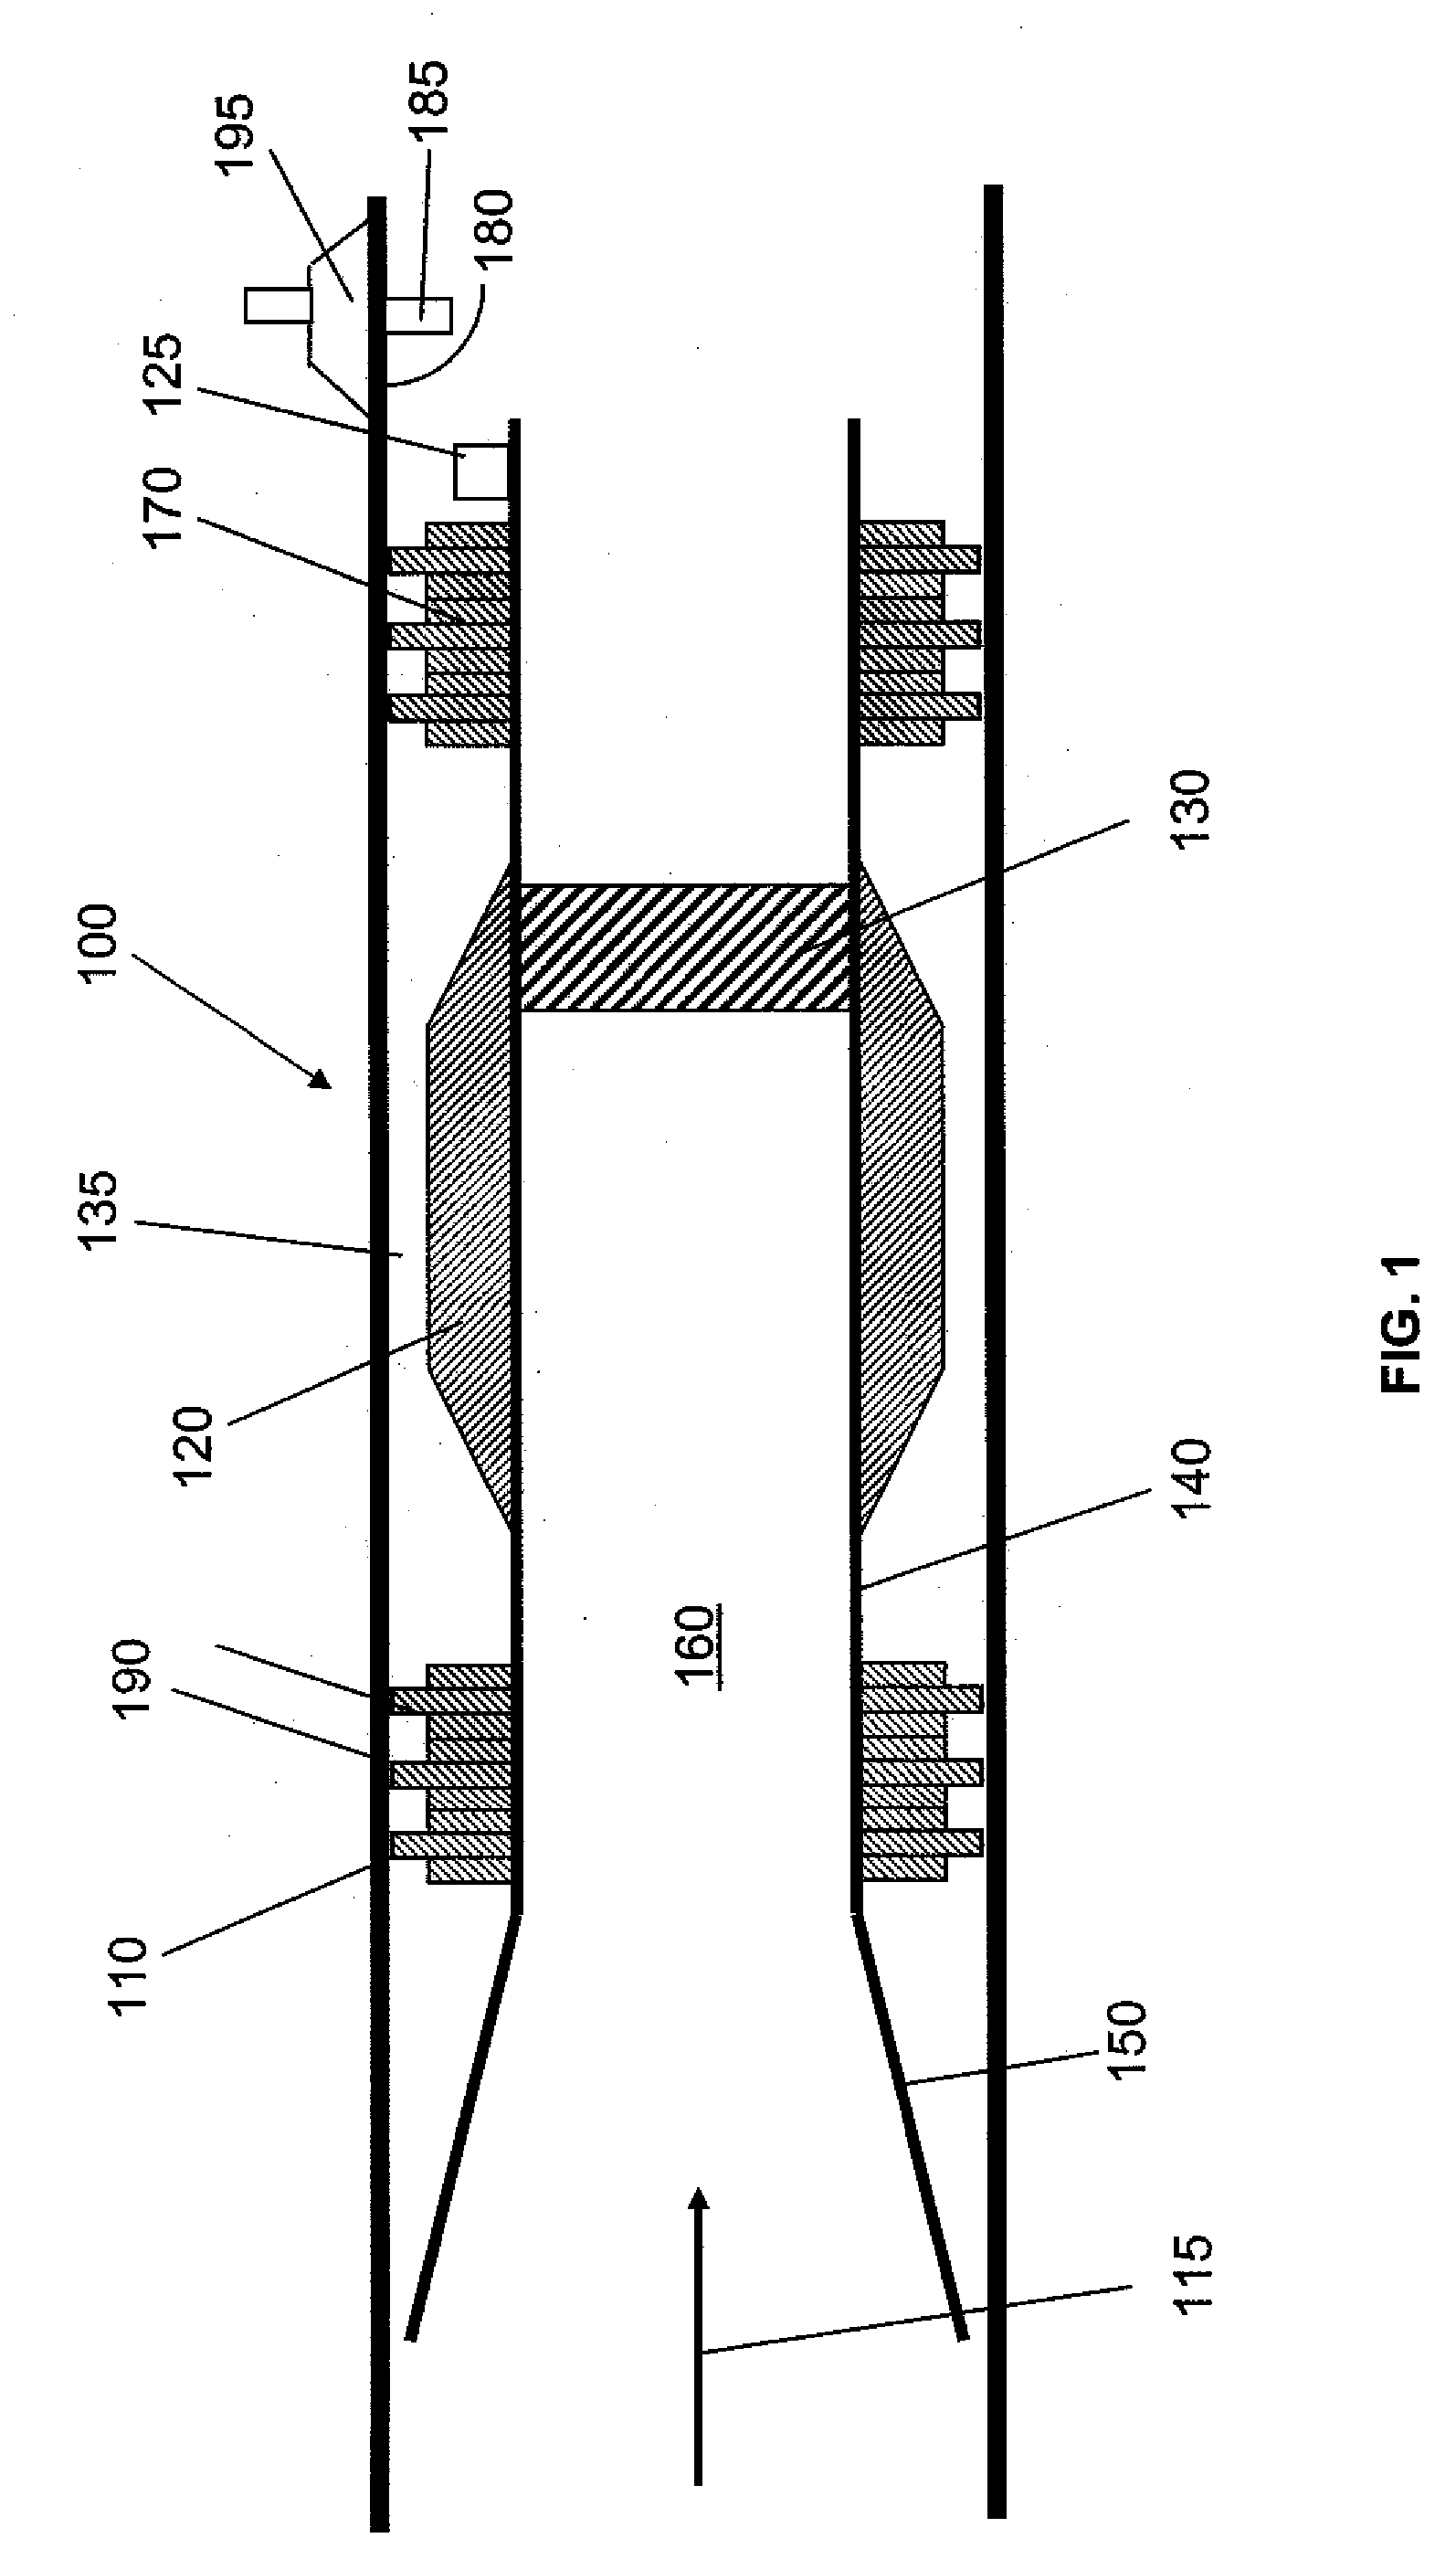 Apparatus for sealing and isolating pipelines